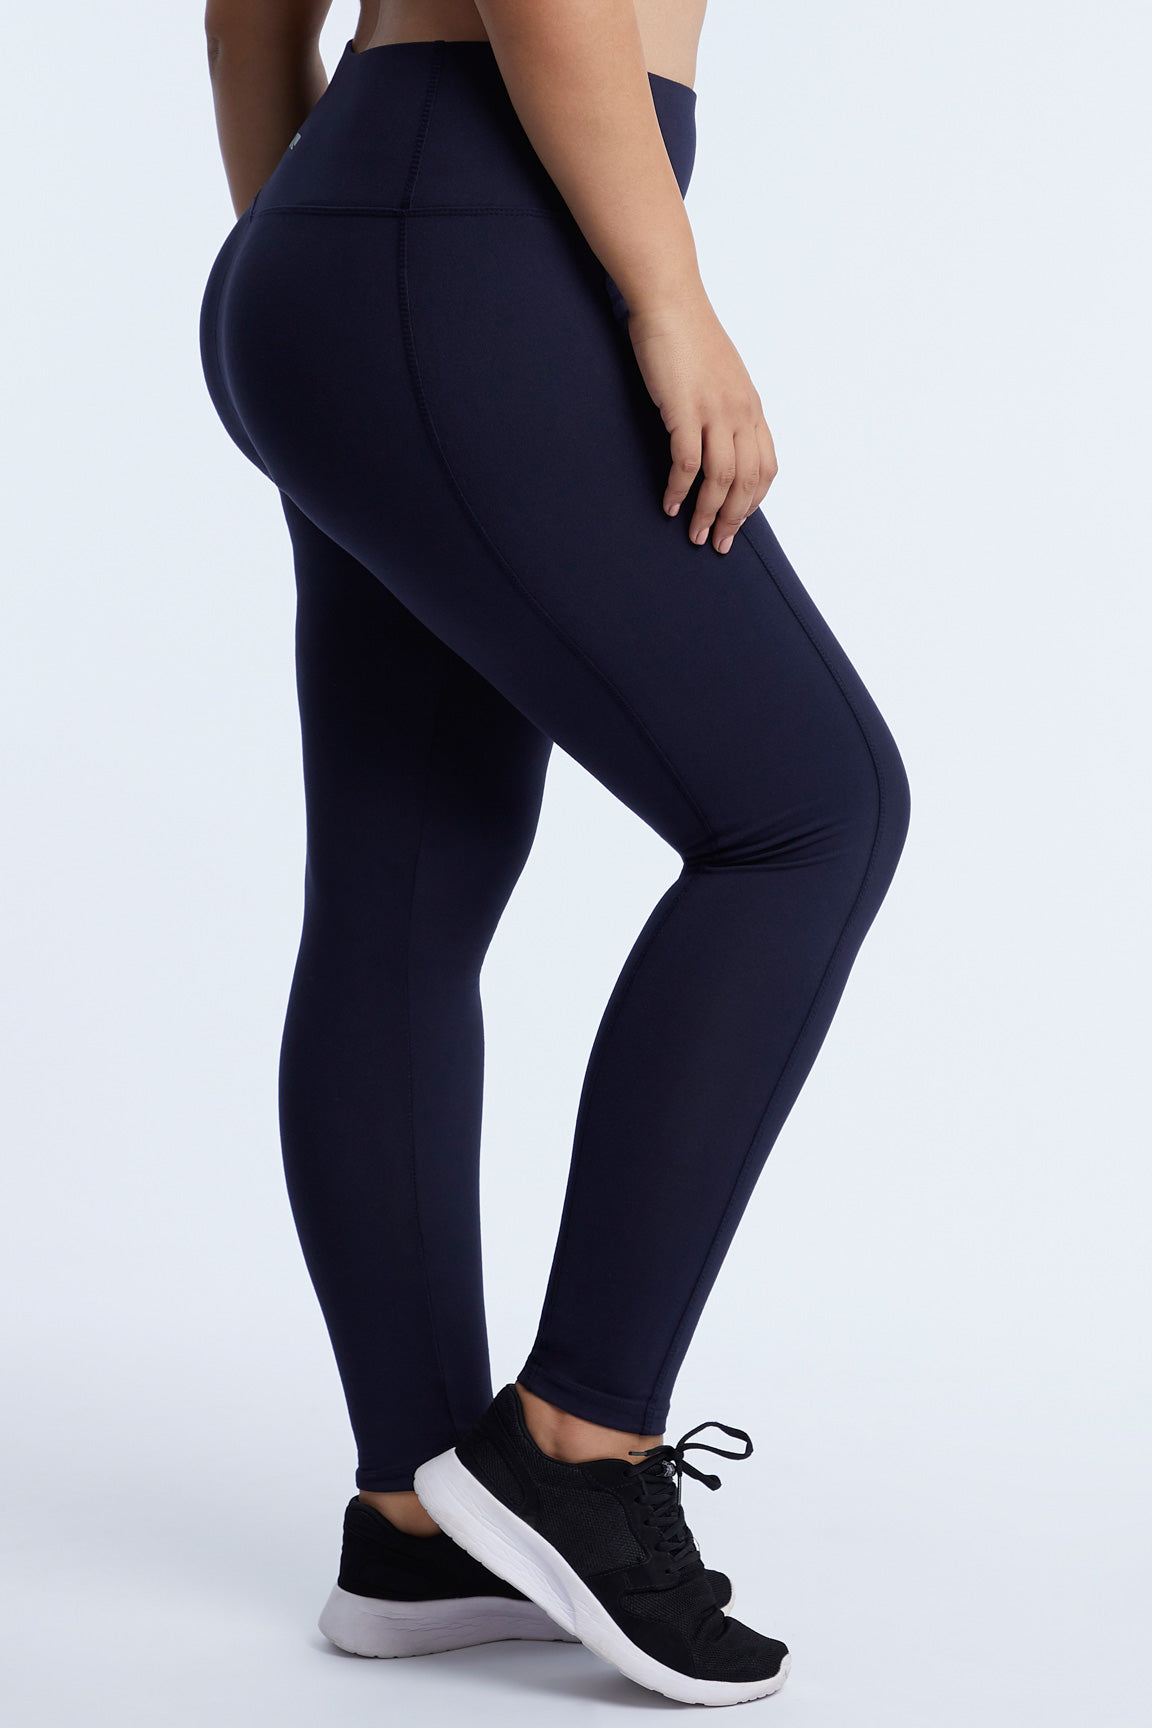 MEJINIG Plus Size Leggings for Women with Pockets, L-5XL Mesh Yoga Pants  High Waisted, Tummy Control Workout Leggings Thick Black L at   Women's Clothing store